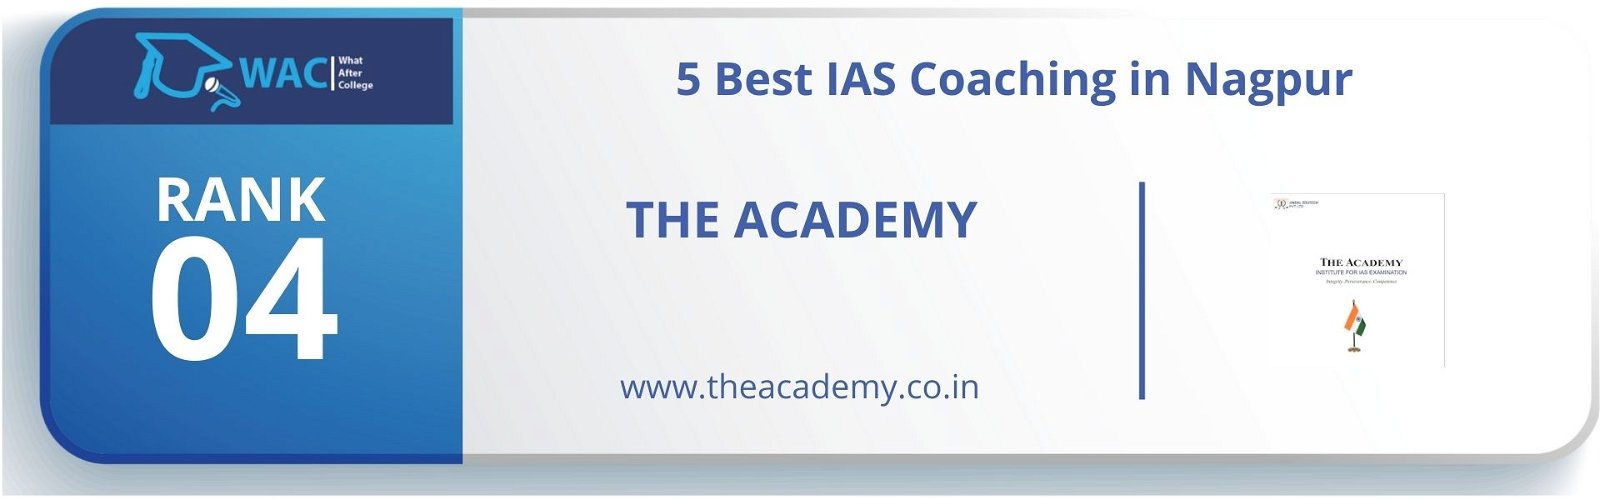 5Best IAS Coaching in Nagpur Rank 4:The Academy in Nagpur